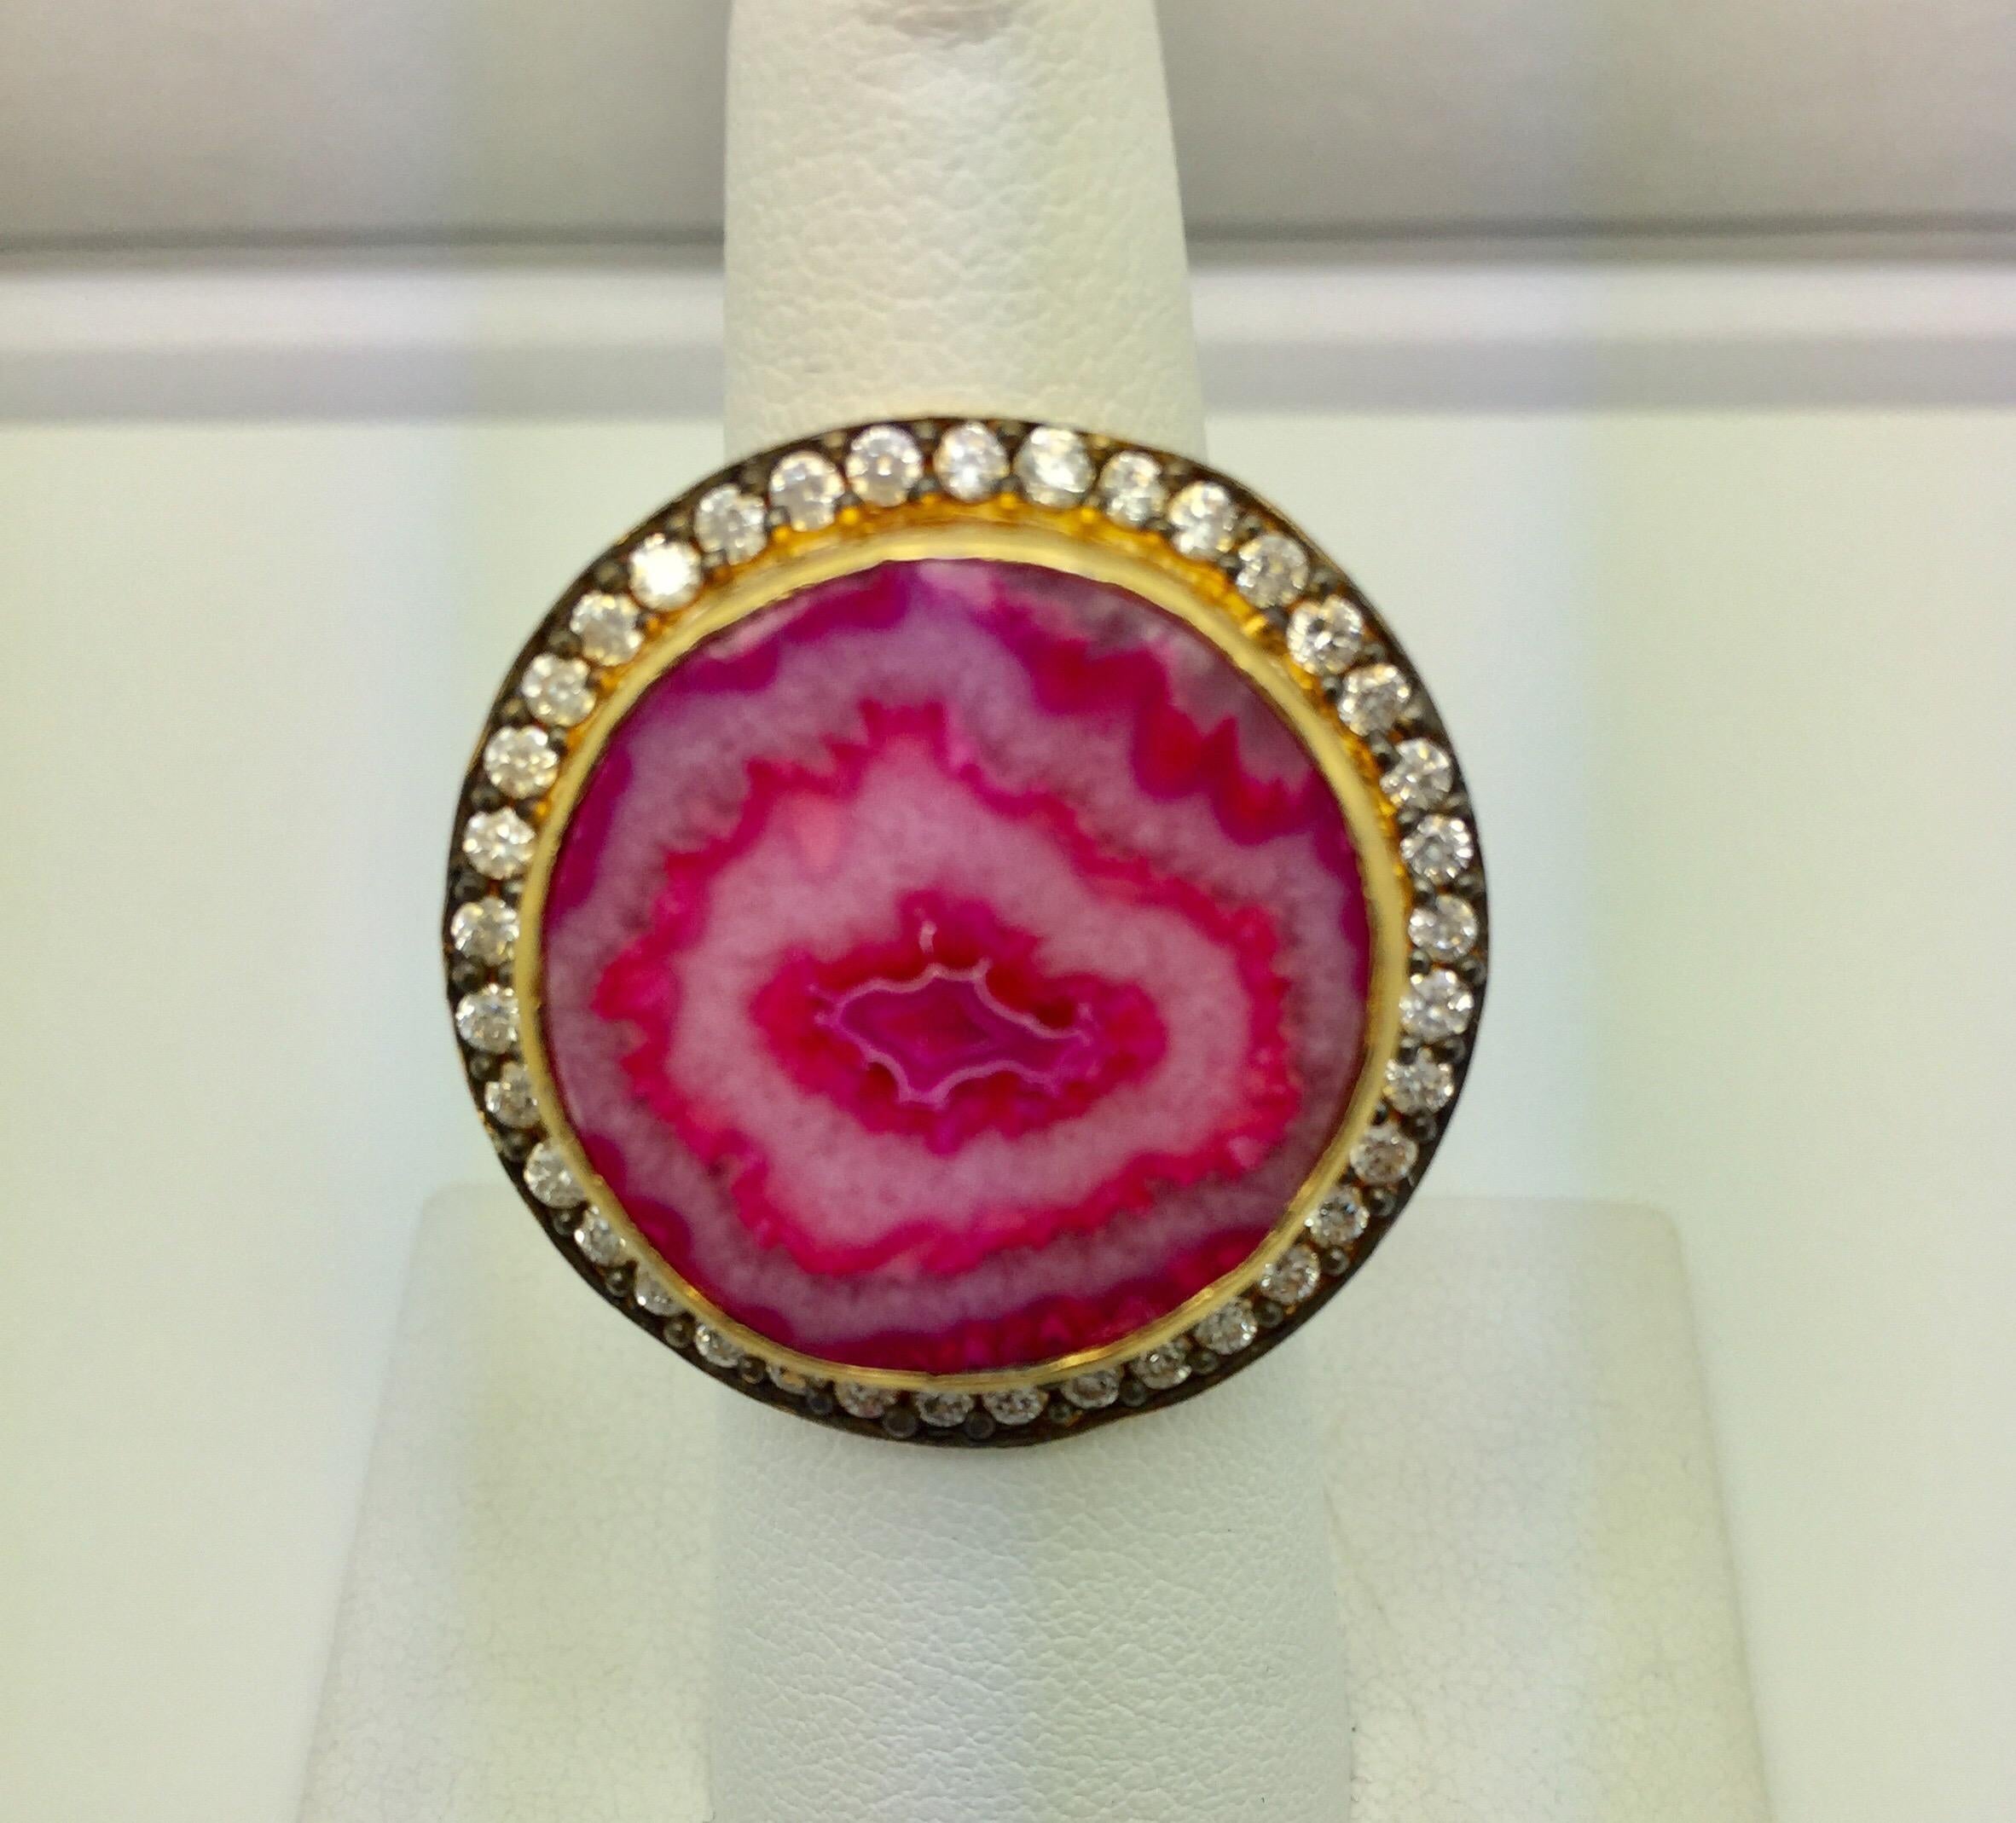 The brilliance of the stone sits perfectly within a sparkling CZ border, in this pink agate druzy ring. Artisan craftsmanship is evident in this superbly finished ring that you will be proud to wear.  Available in ring size 7 & 8.  More color